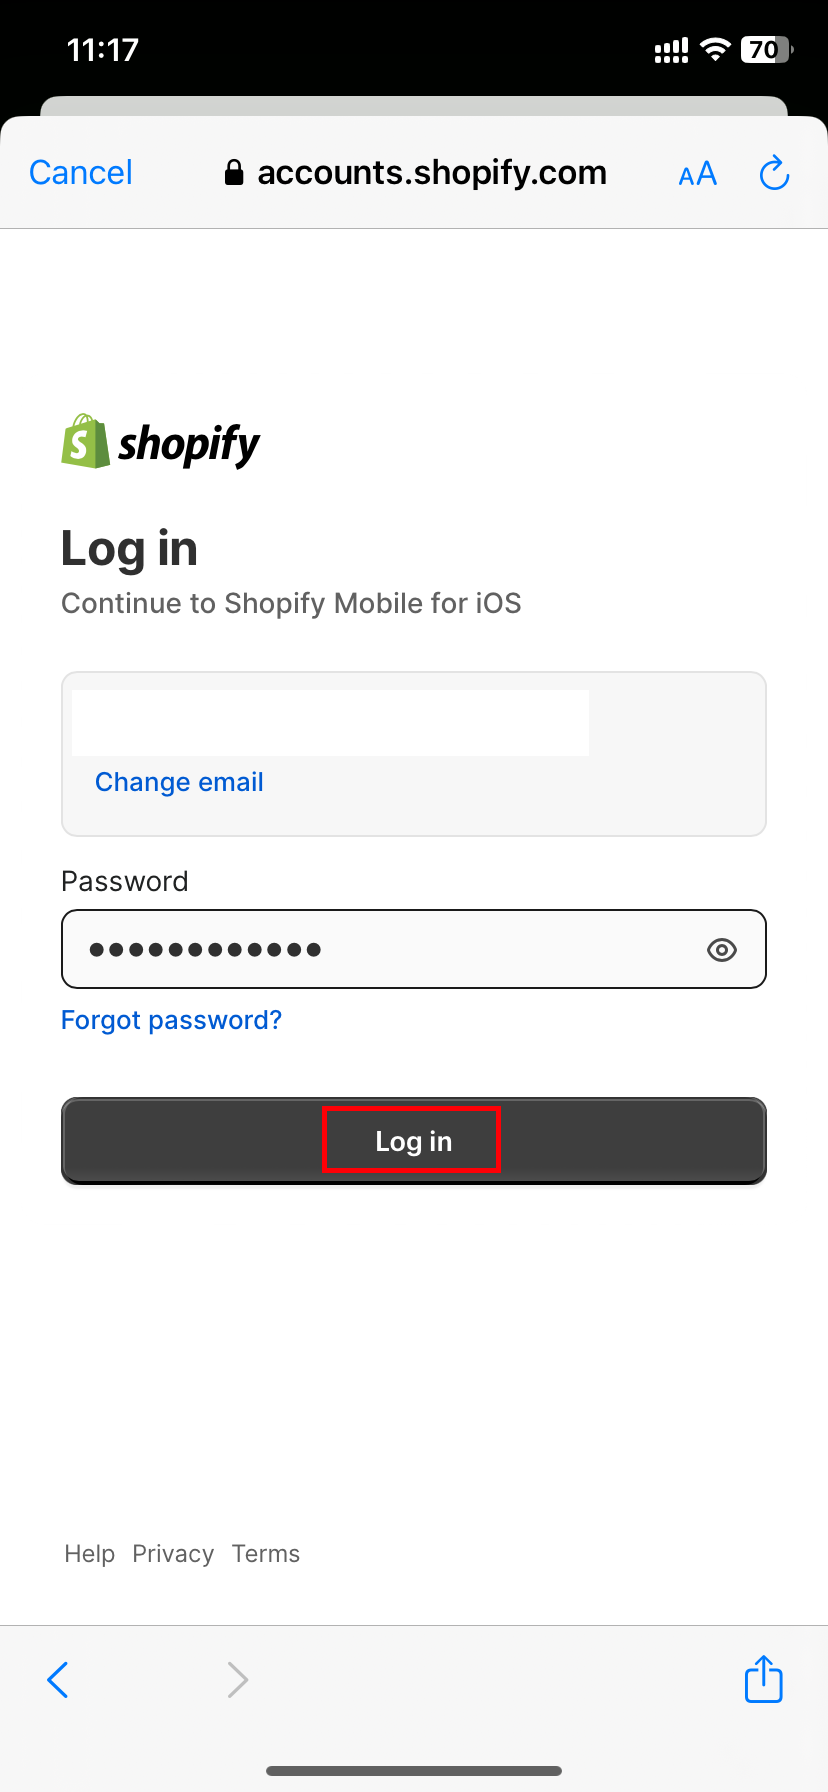 fill in your password and click “Log in”